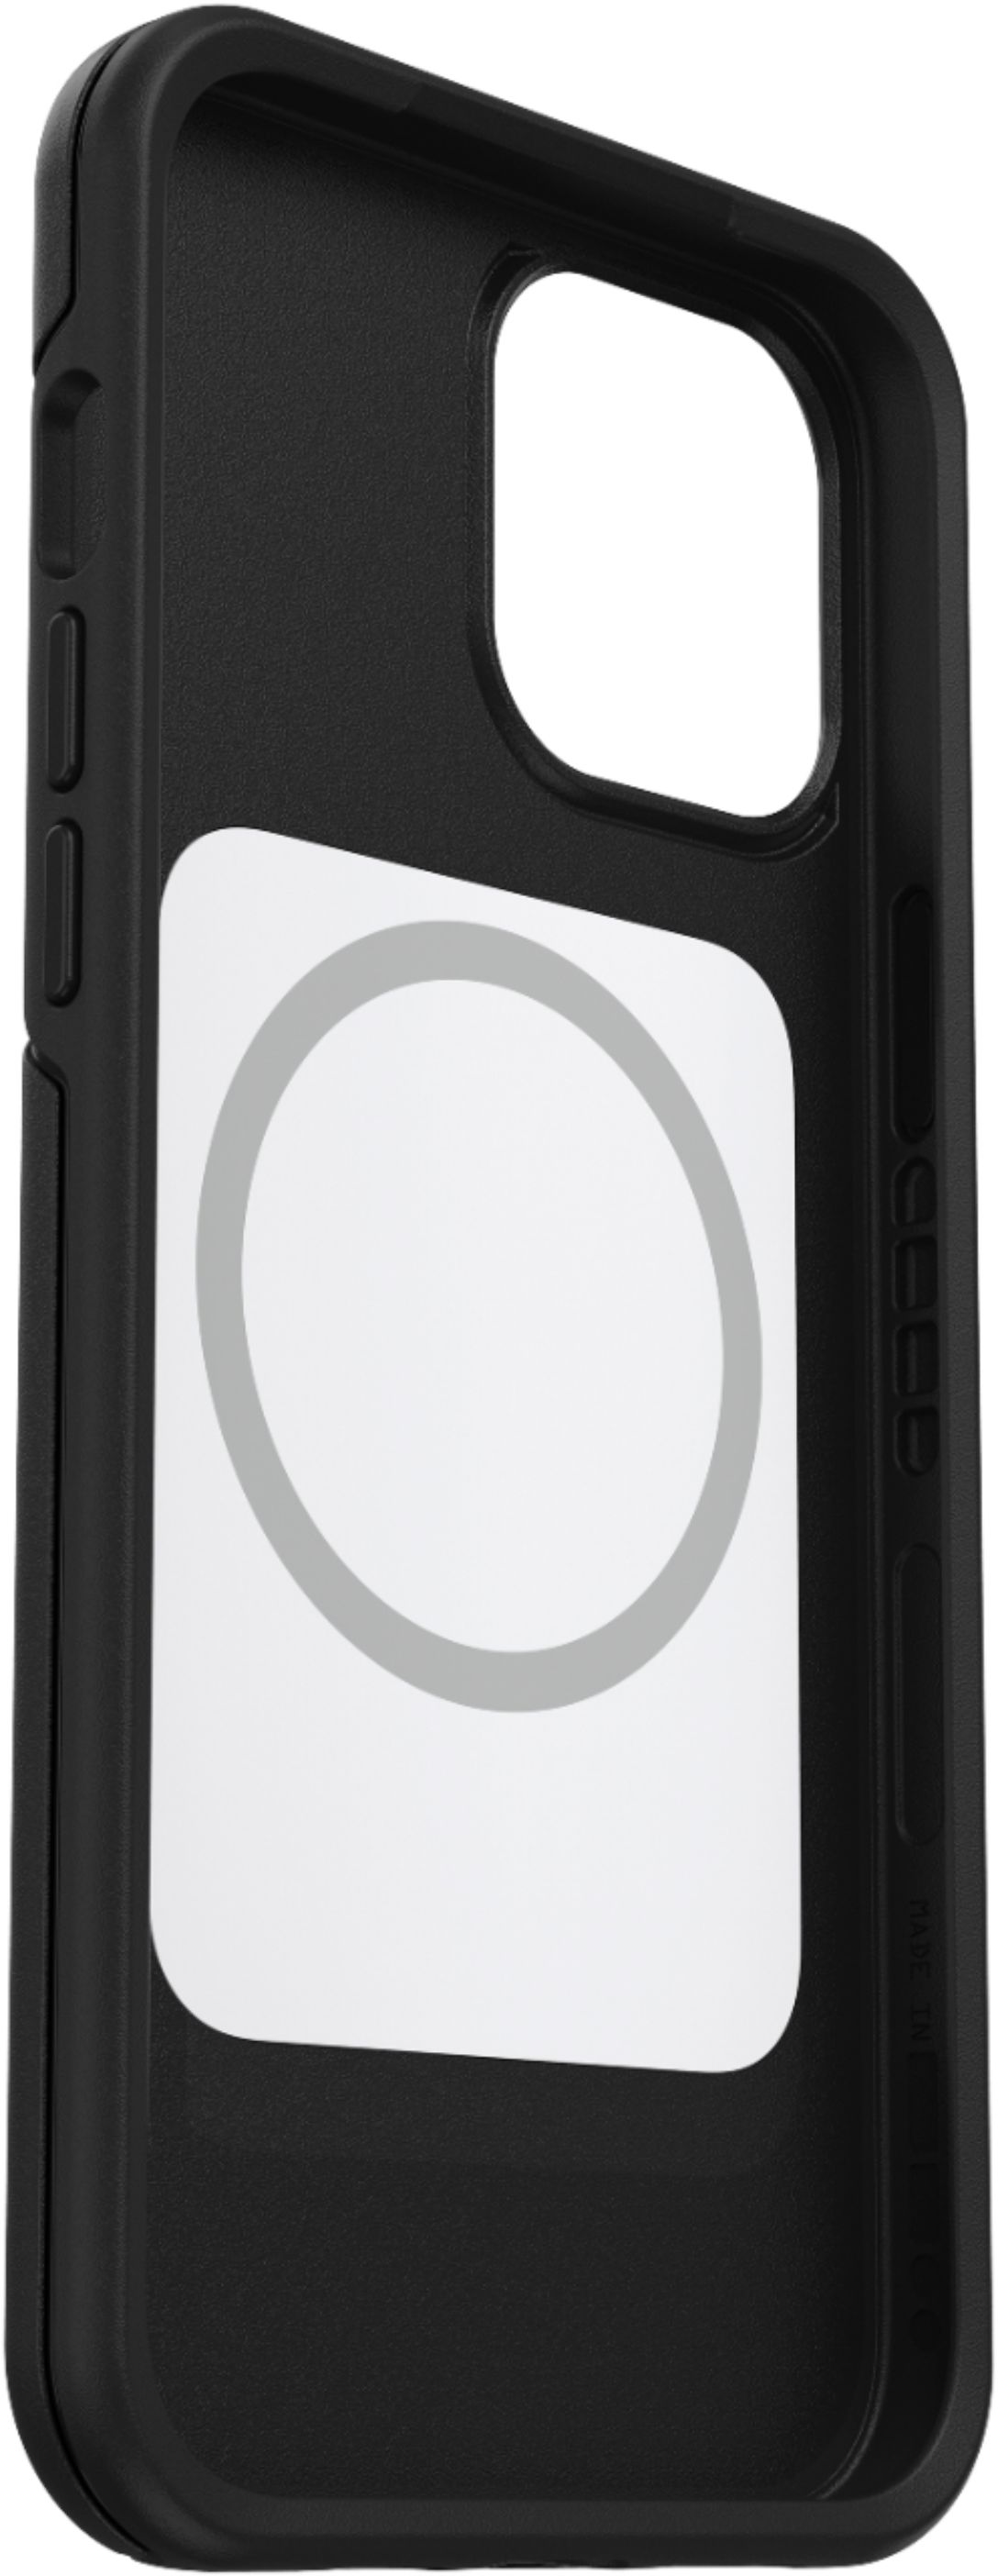 Otterbox Symmetry Series With Magsafe Carrying Case For Apple Iphone 12 Pro Max Black 77 Best Buy